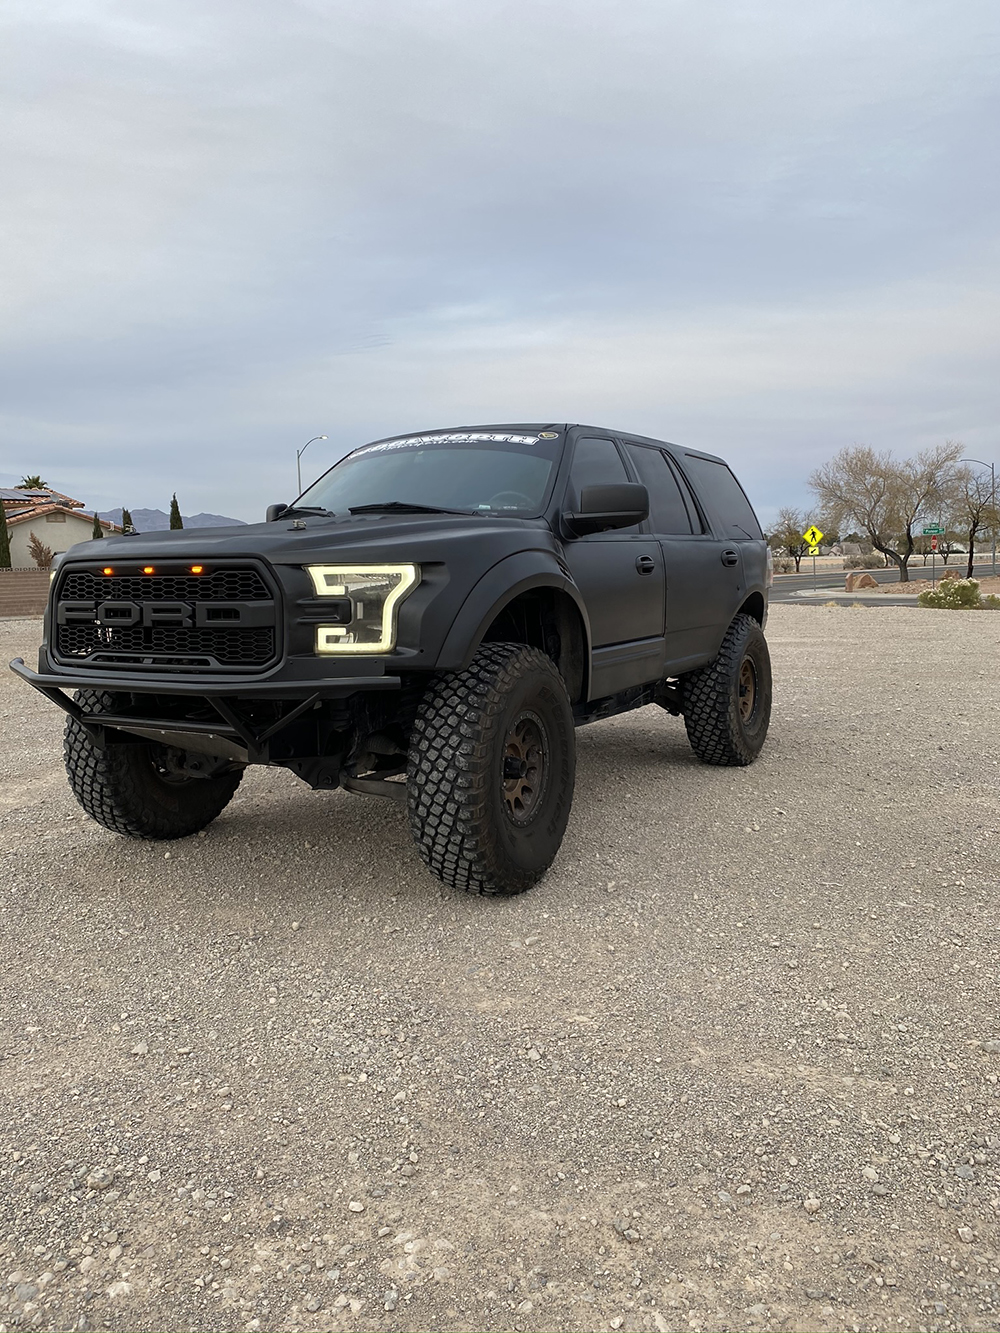 Lifted Lifted Ford Expedition With Raptor fiberglass conversion front end